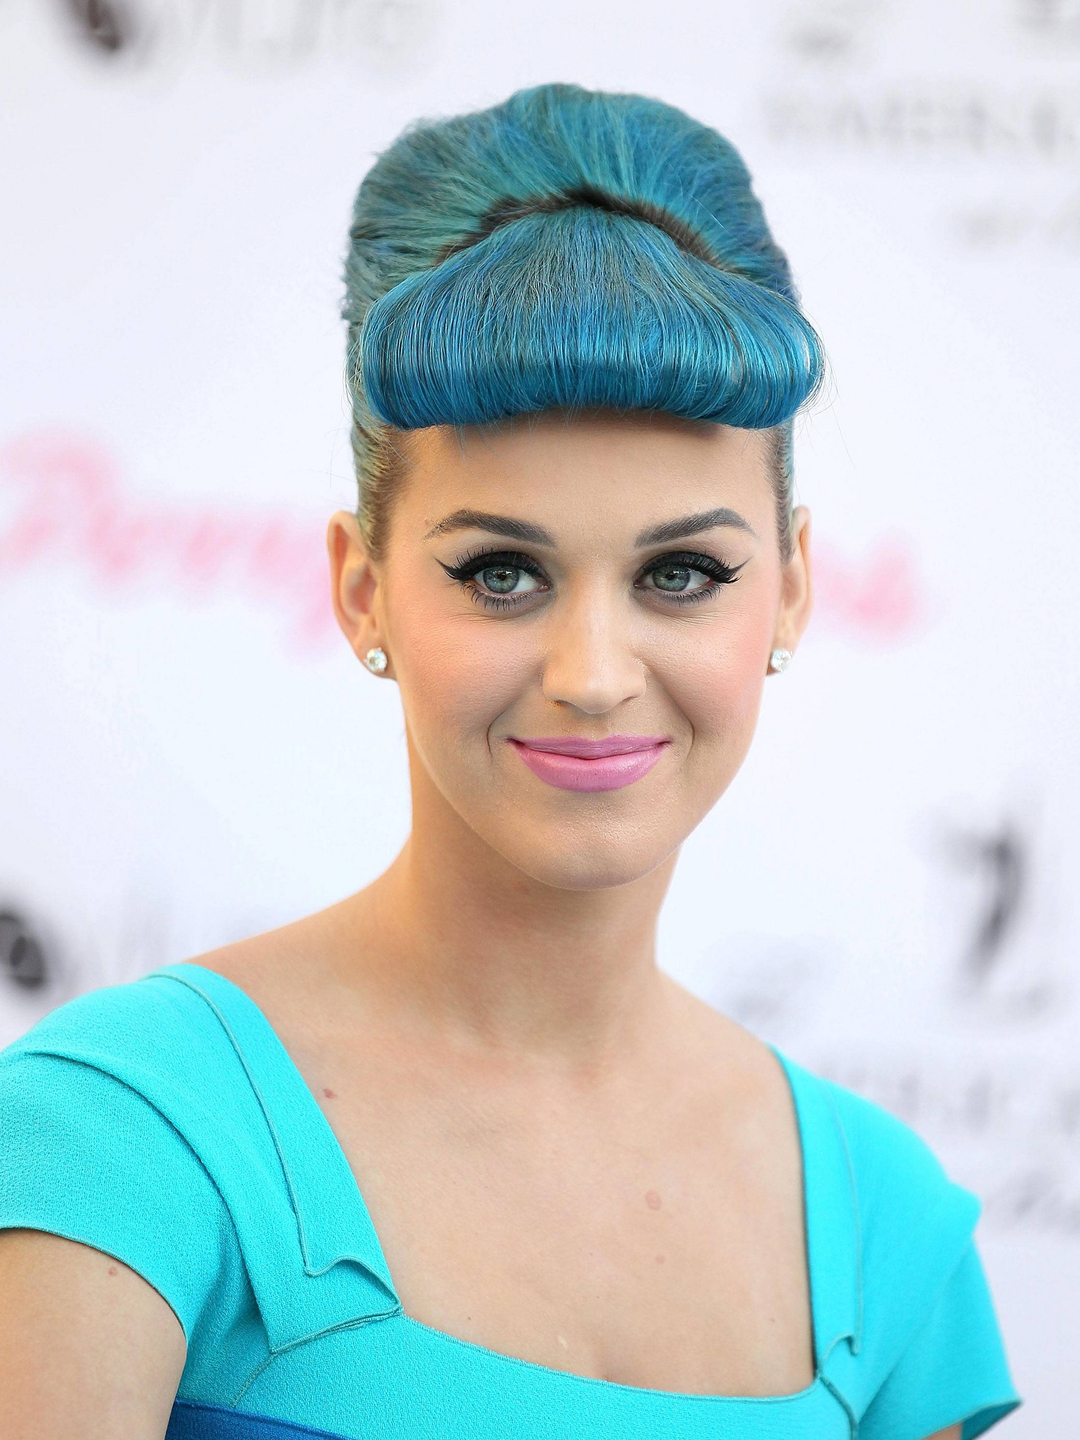 Katy Perry biography